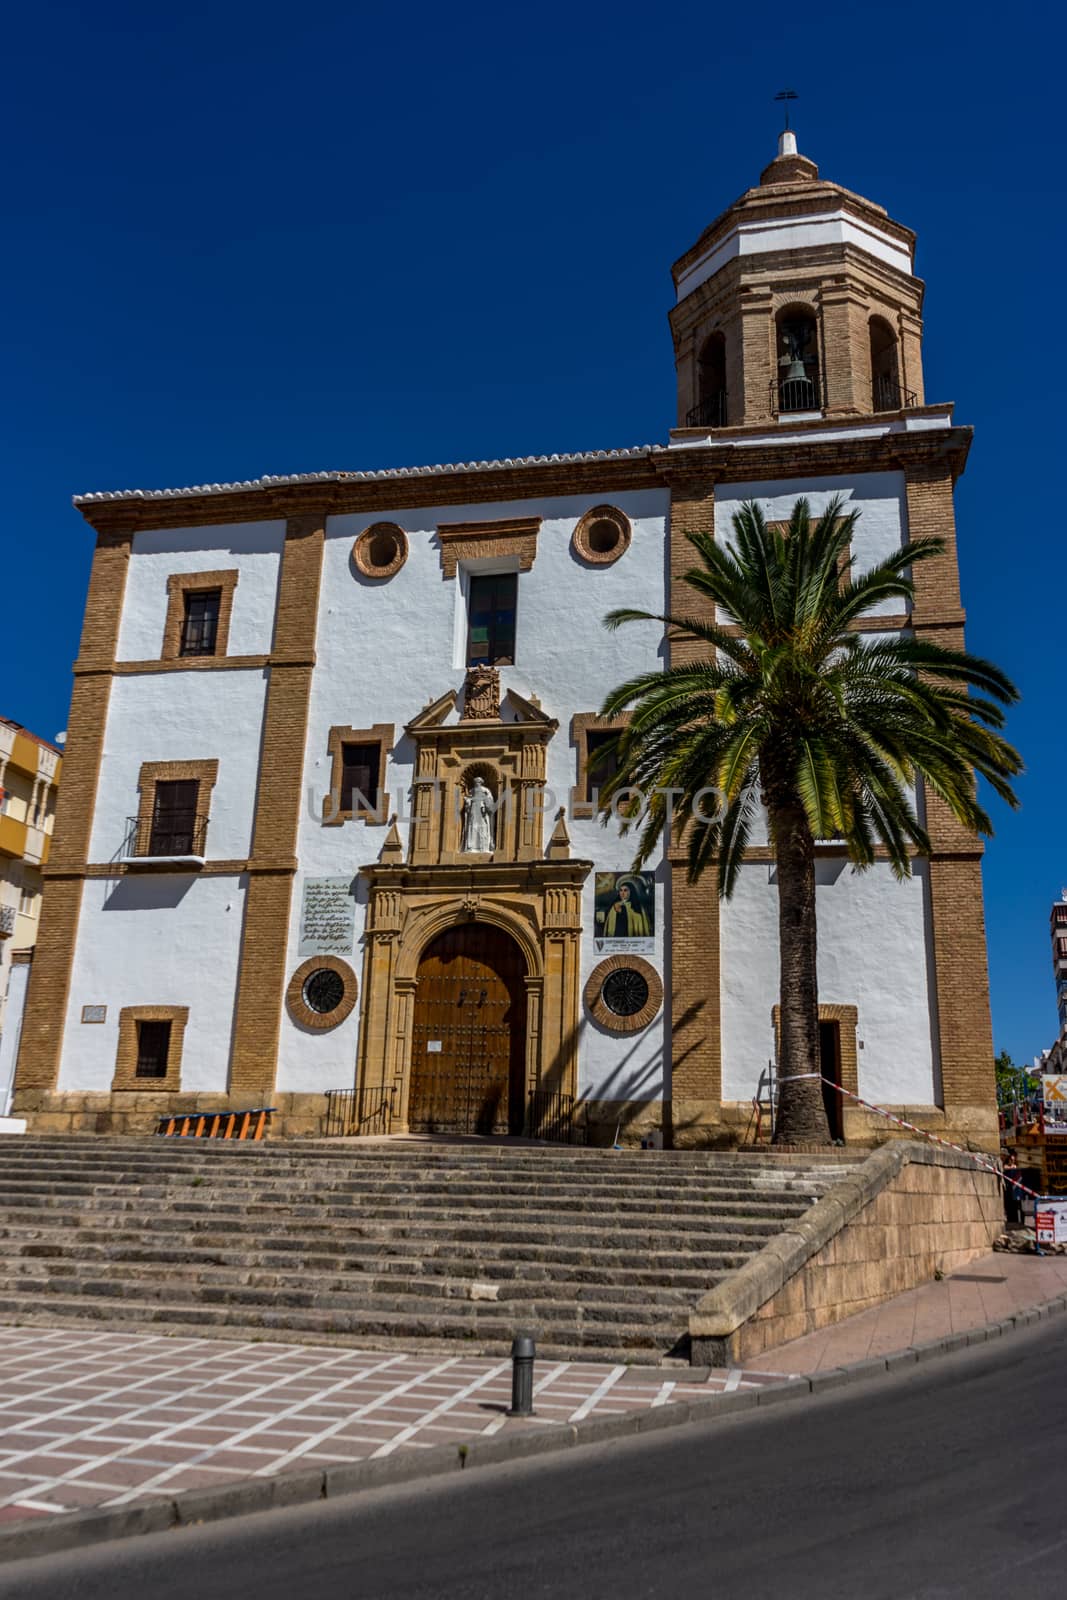 A church in the city of of Ronda Spain, Europe on a hot summer day with clear blue skies with a palm tree in the front